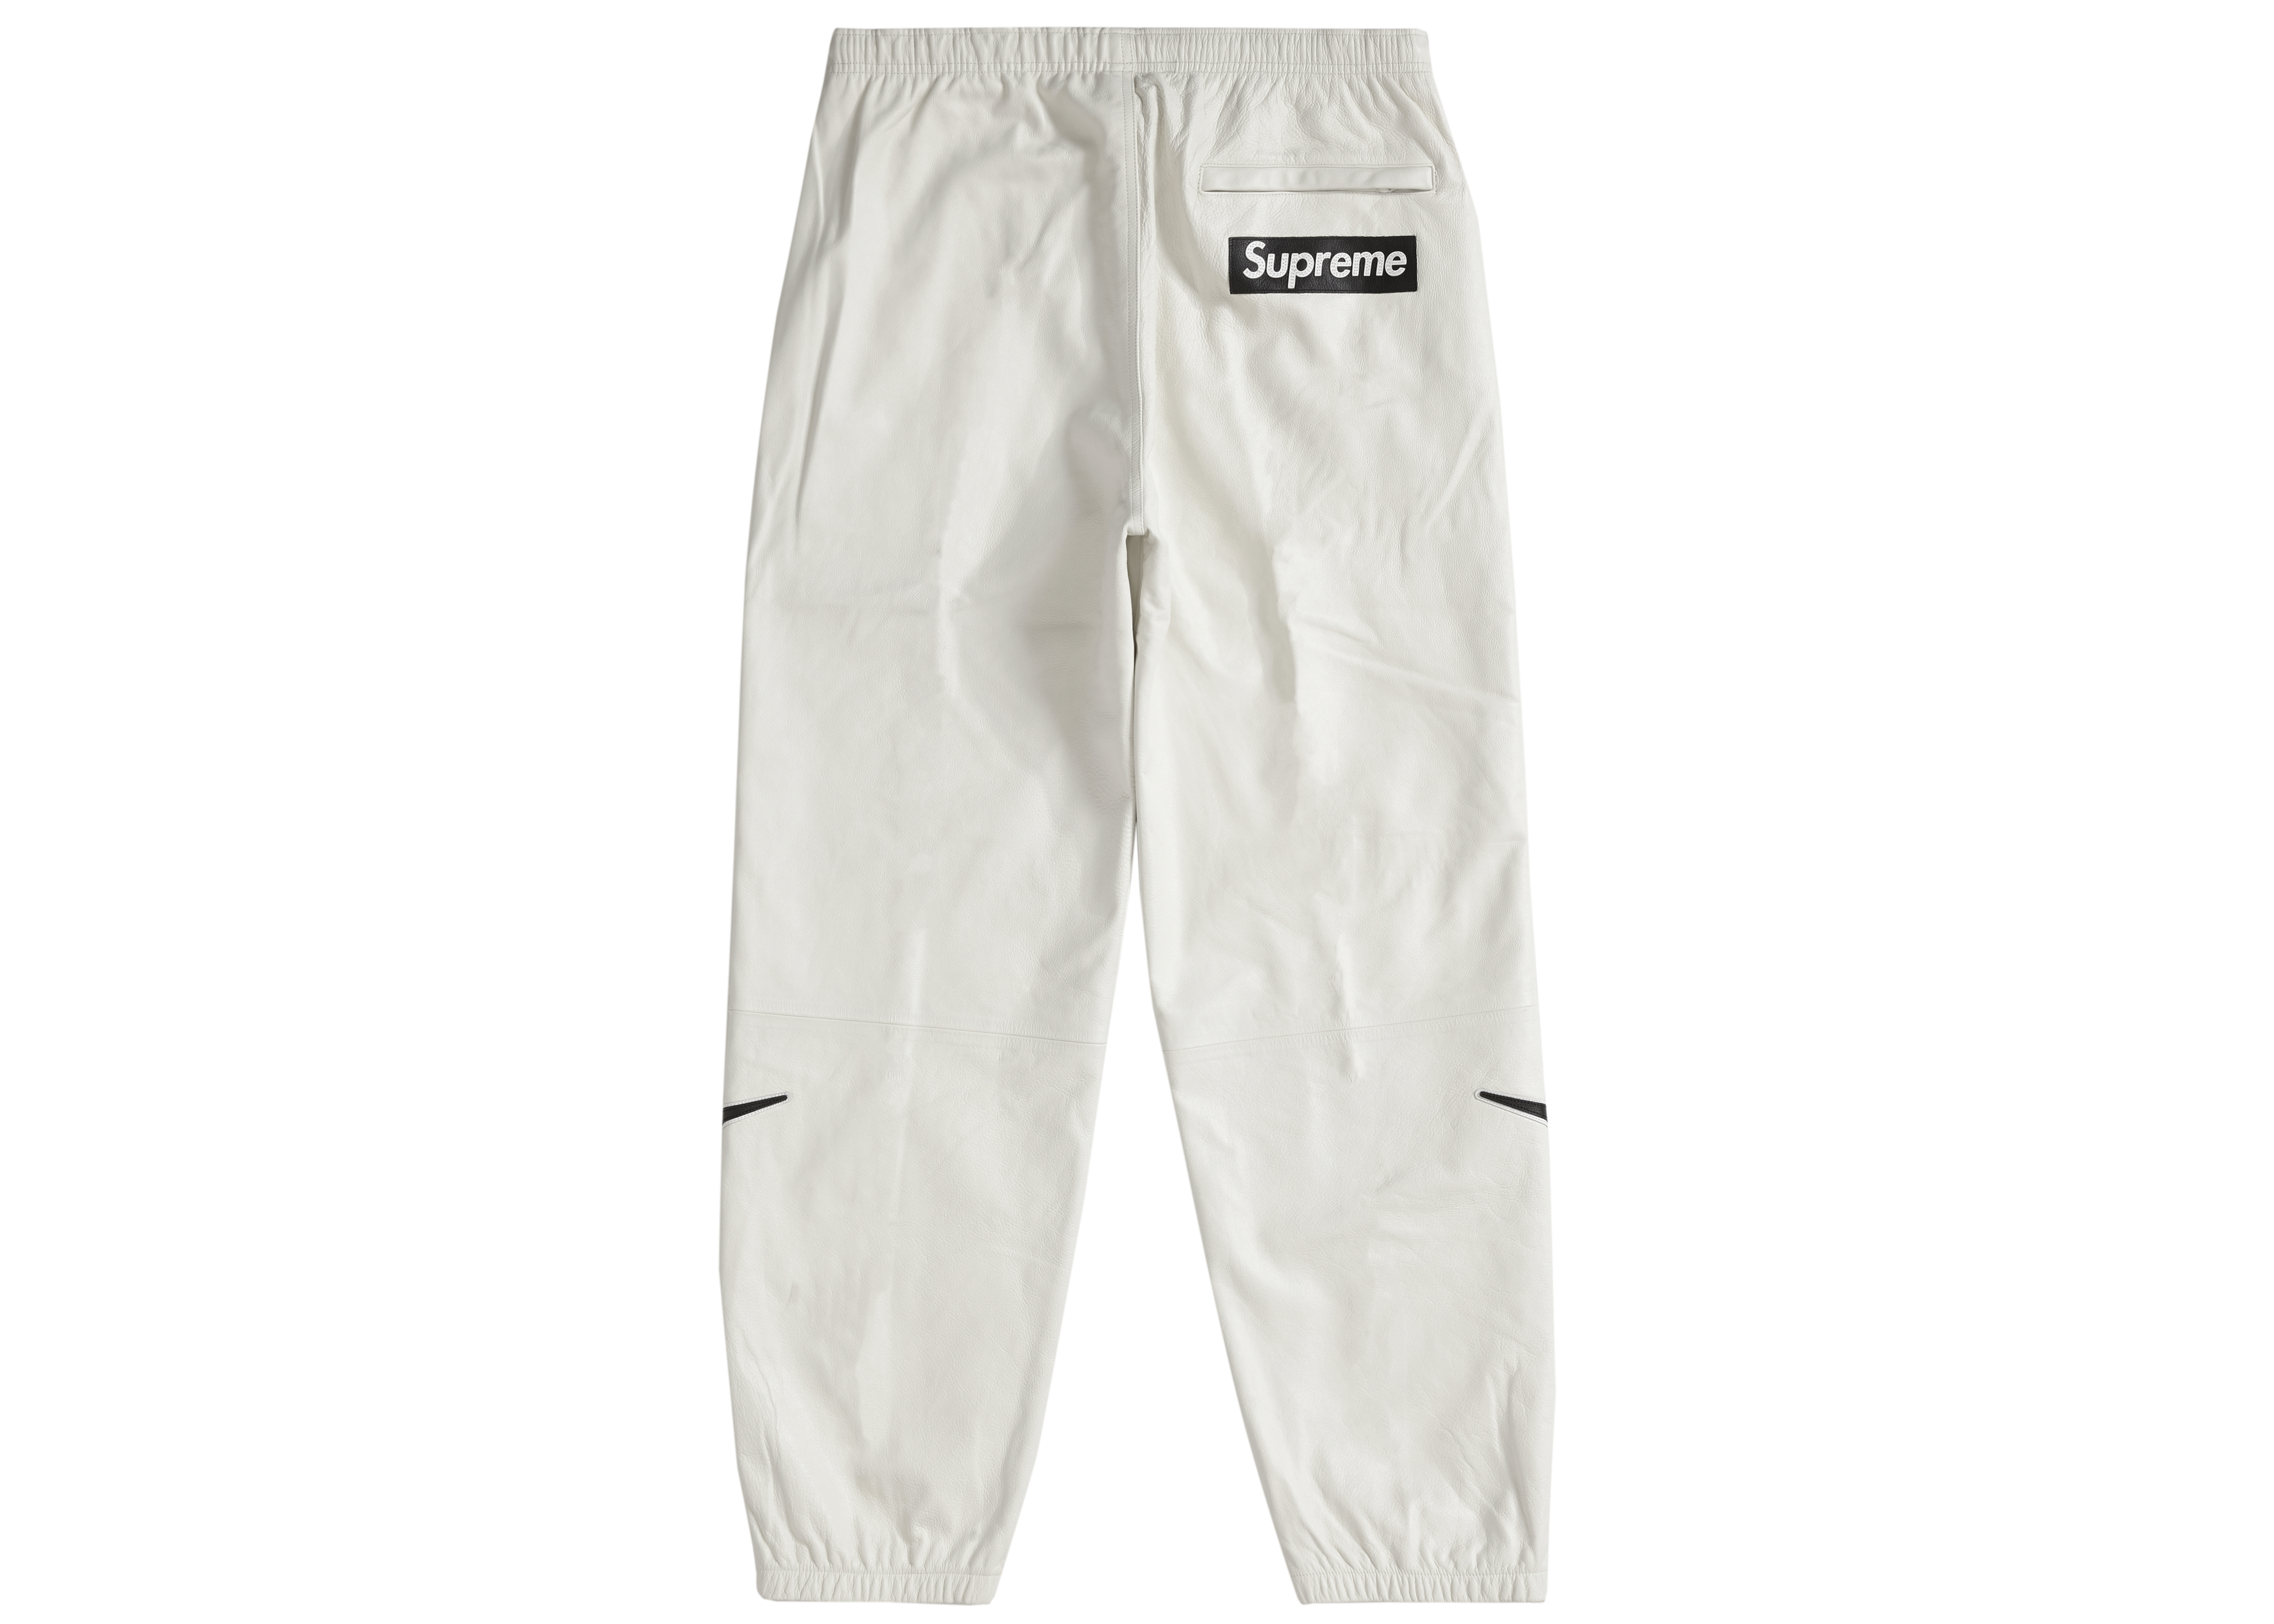 Supreme Nike Leather Warm Up Pantその他